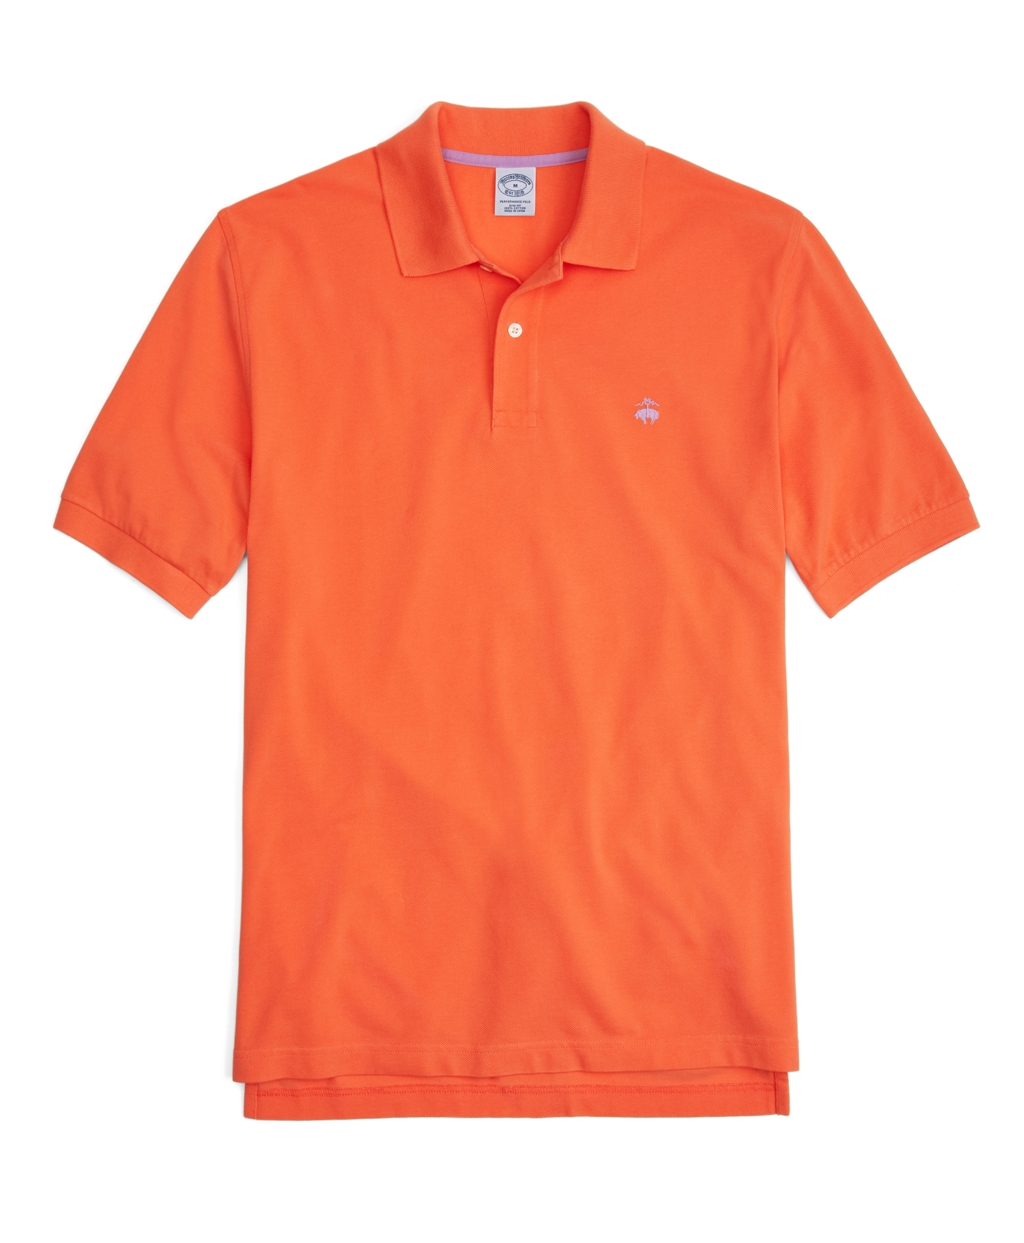 Brooks Brothers Golden Fleece® Slim Fit Performance Polo Shirt in ...